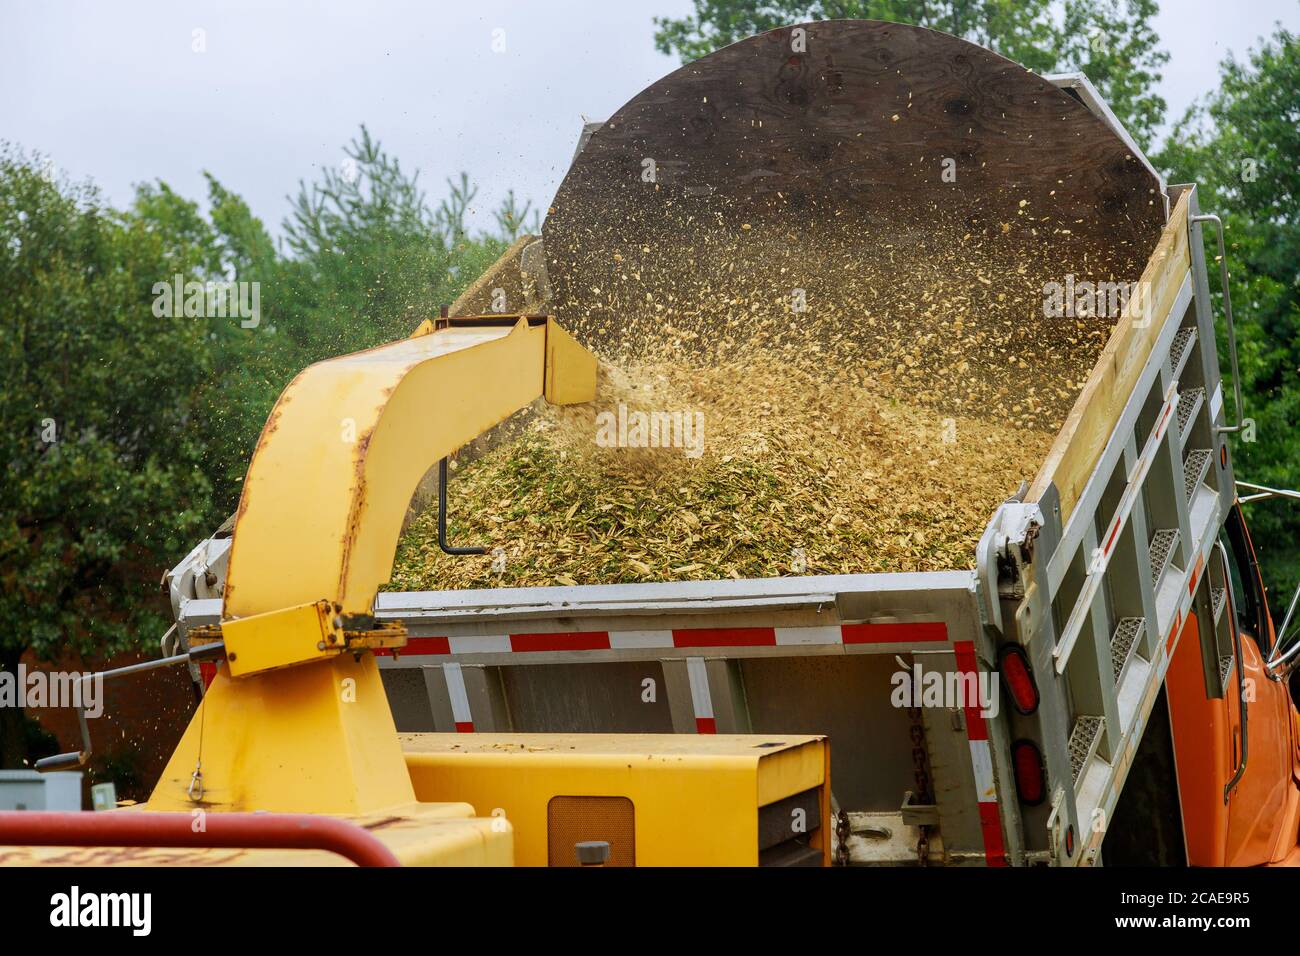 Wood chipper blowing tree branches cut a portable machine to the back of a truck after an unexpected hurricane storm Stock Photo